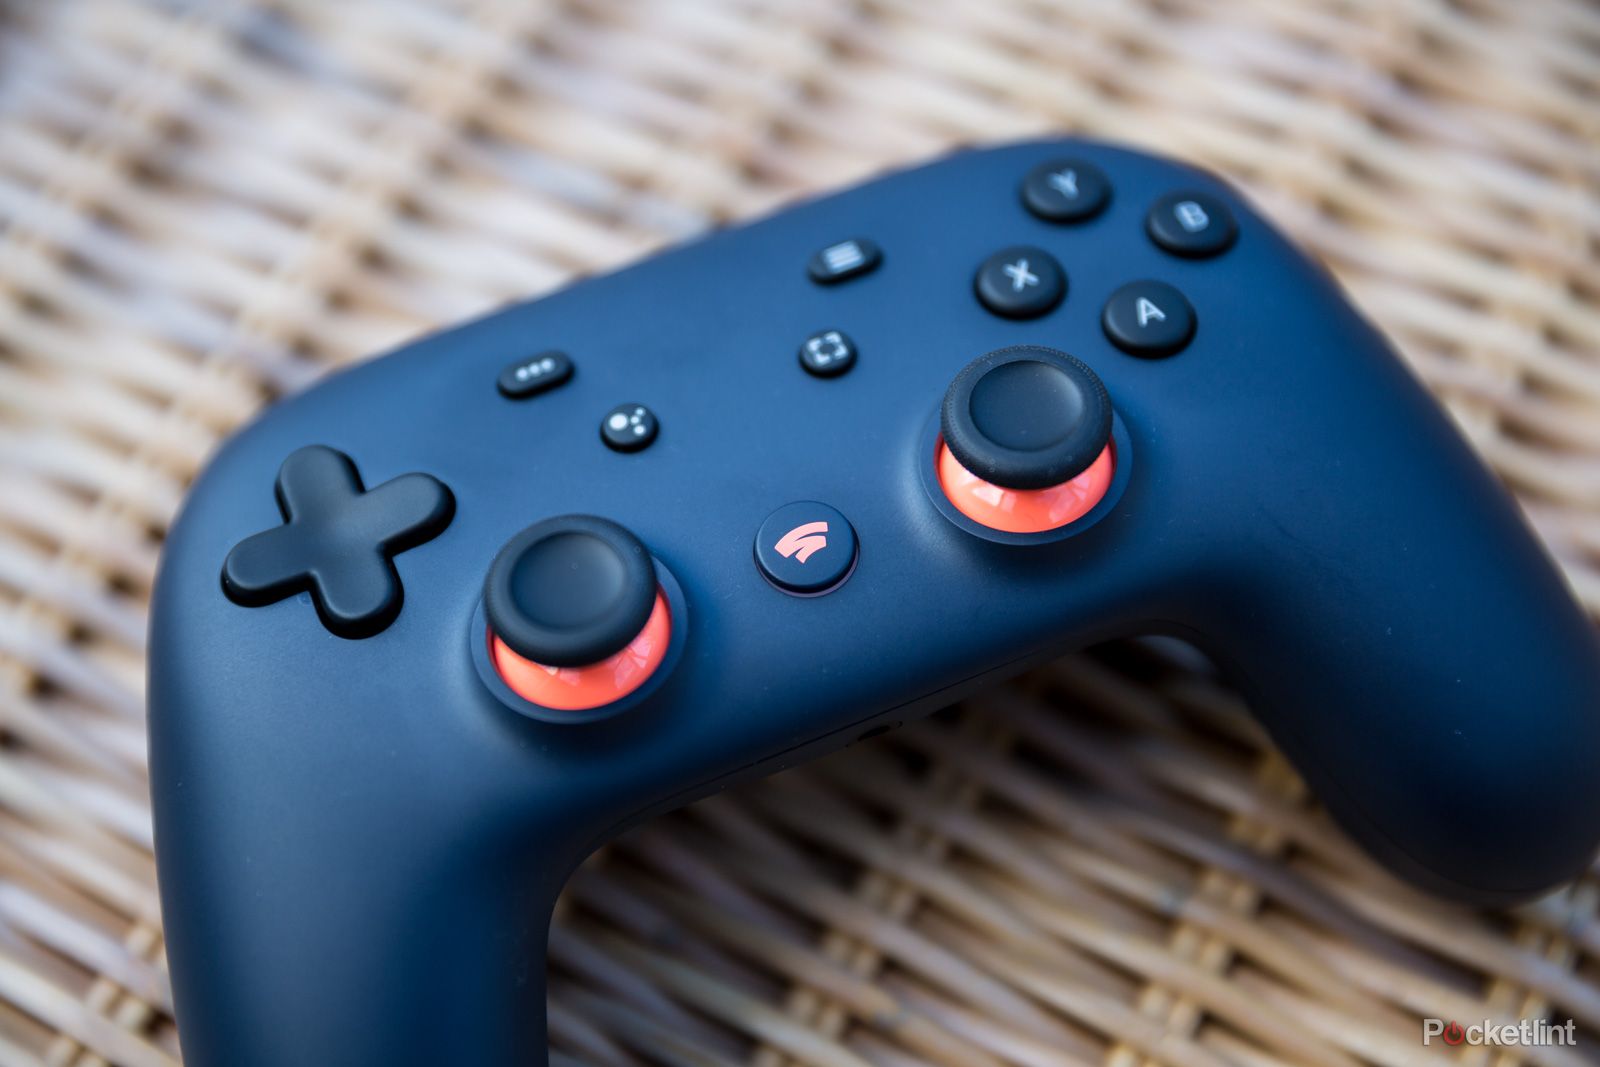 Google stadia controller laid on a wicker surface